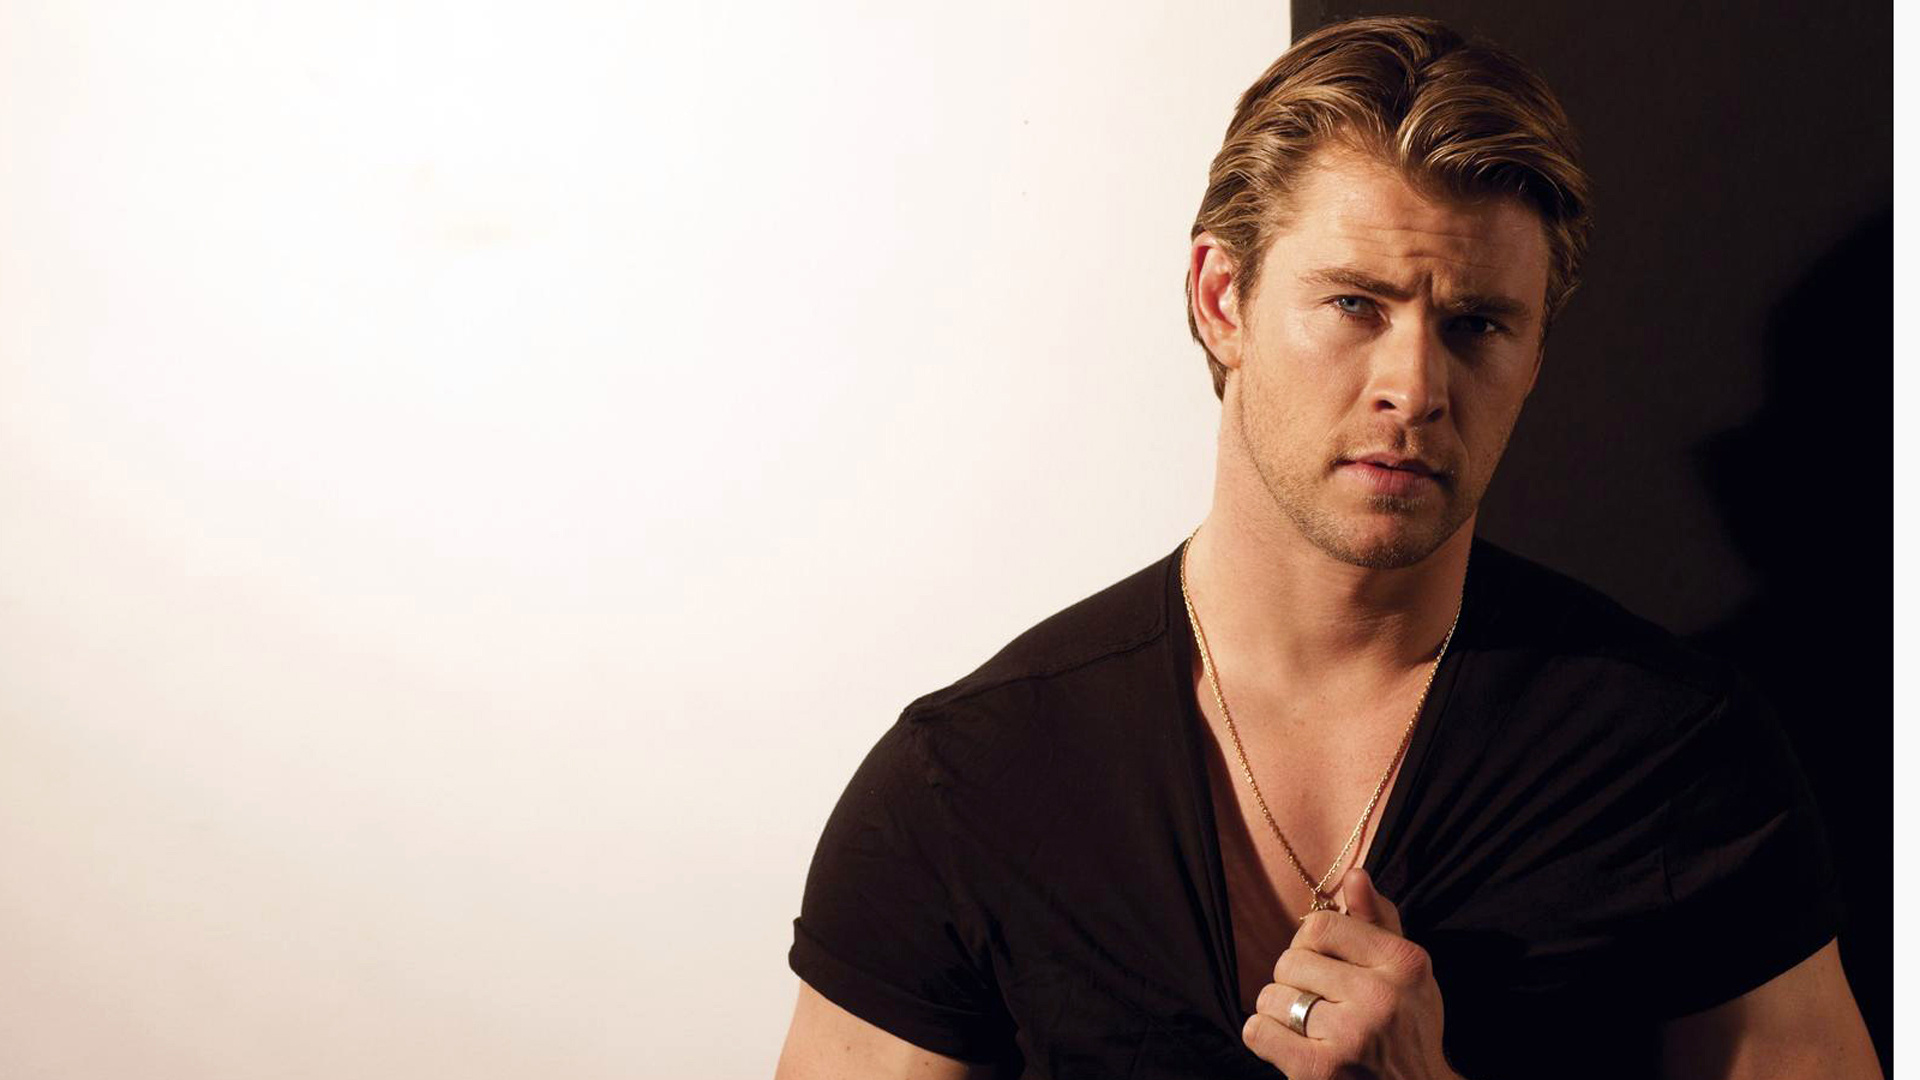 Chris Hemsworth: Australian actor, Named the “Sexiest Man Alive” by People Magazine, 2014. 1920x1080 Full HD Wallpaper.